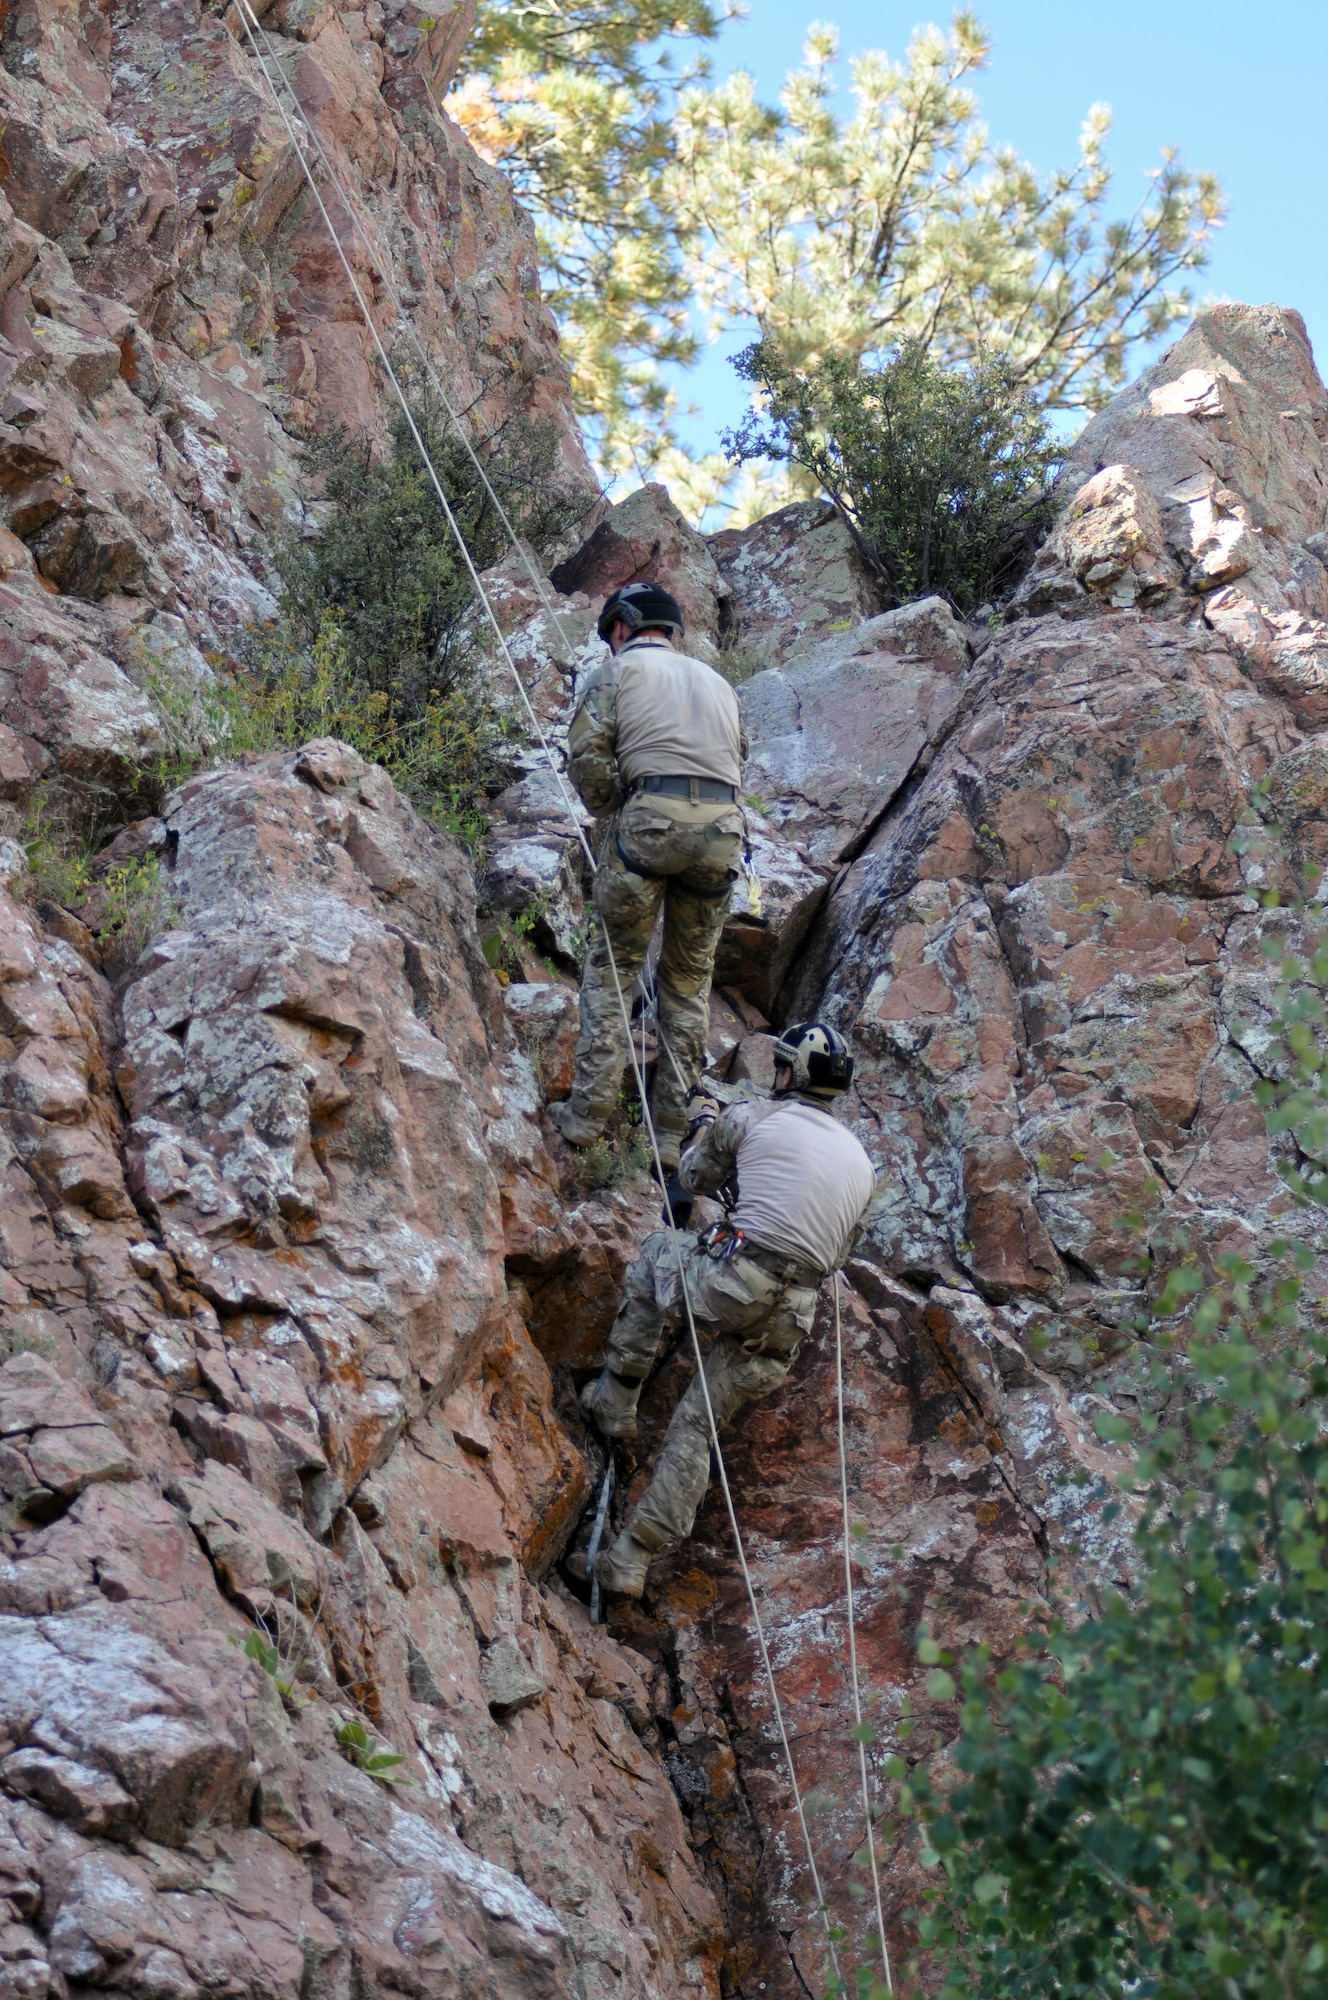 Two pararescuemen rappel down an 80-foot vertical cliff during the 2014 Guardian Angel Rodeo, Grants, New Mexico, September 23, 2014. The rodeo, or competition, was a week-long event that tested the PJs on land navigation skills, high-angel rope rescues, survival techniques, medical skills, weapons operations and overall physical endurance. (U.S. Air Force photo/ Tech. Sgt. Katie Spencer)  